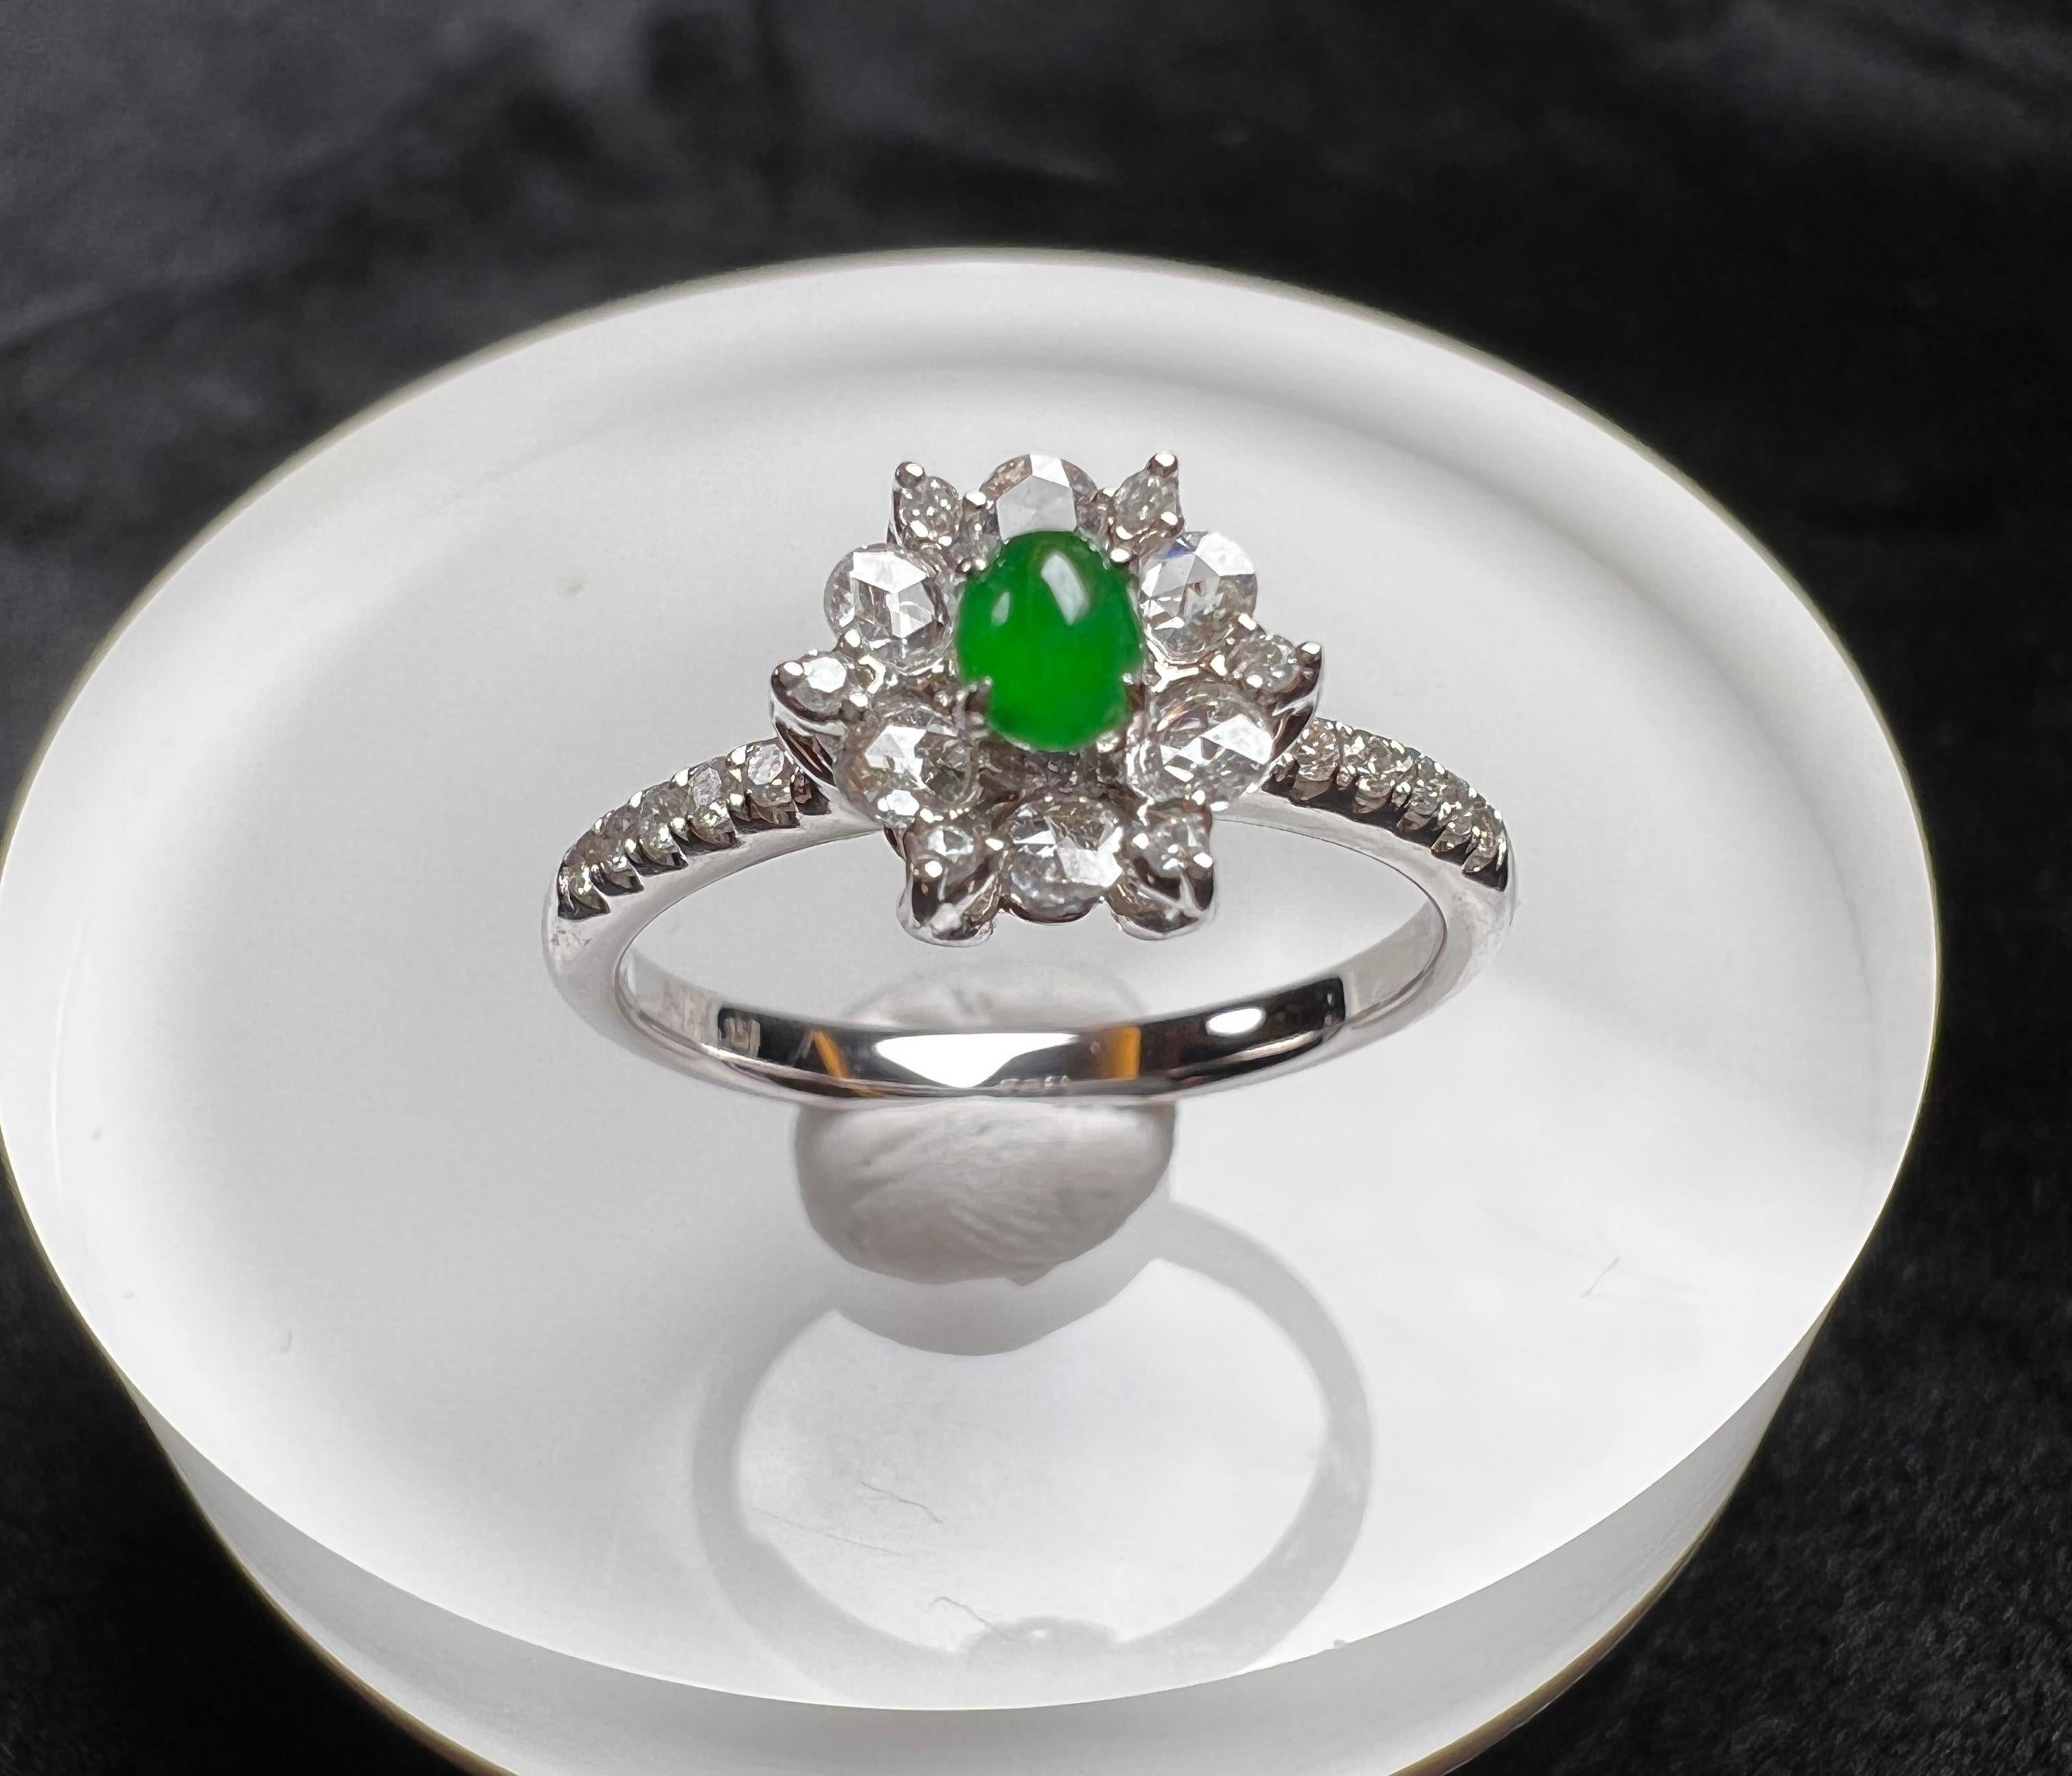 18K White Gold Green Jadeite Diamond Flower Cluster Ring Engagement Ring 

Size: O (UK) / 7.5 (US) 
Circumference (approx.): 55mm
Diameter (approx.): 17.5mm

Total weight (approx.): 3g
Centre setting measurement (approx.): 8.2*9.1mm 
Main stone